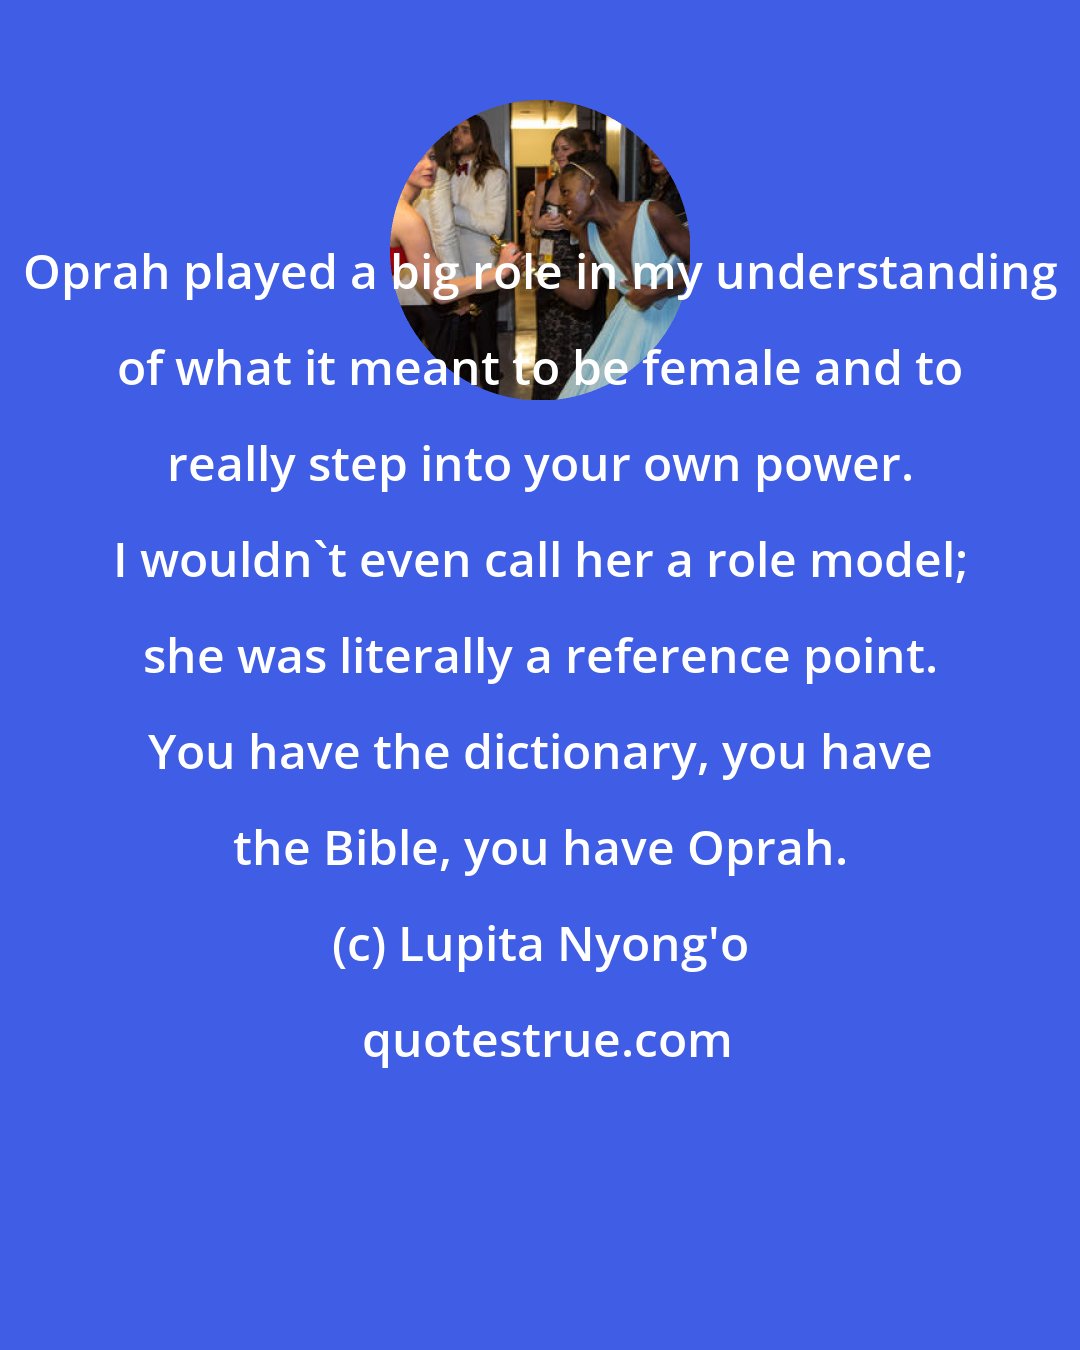 Lupita Nyong'o: Oprah played a big role in my understanding of what it meant to be female and to really step into your own power. I wouldn't even call her a role model; she was literally a reference point. You have the dictionary, you have the Bible, you have Oprah.